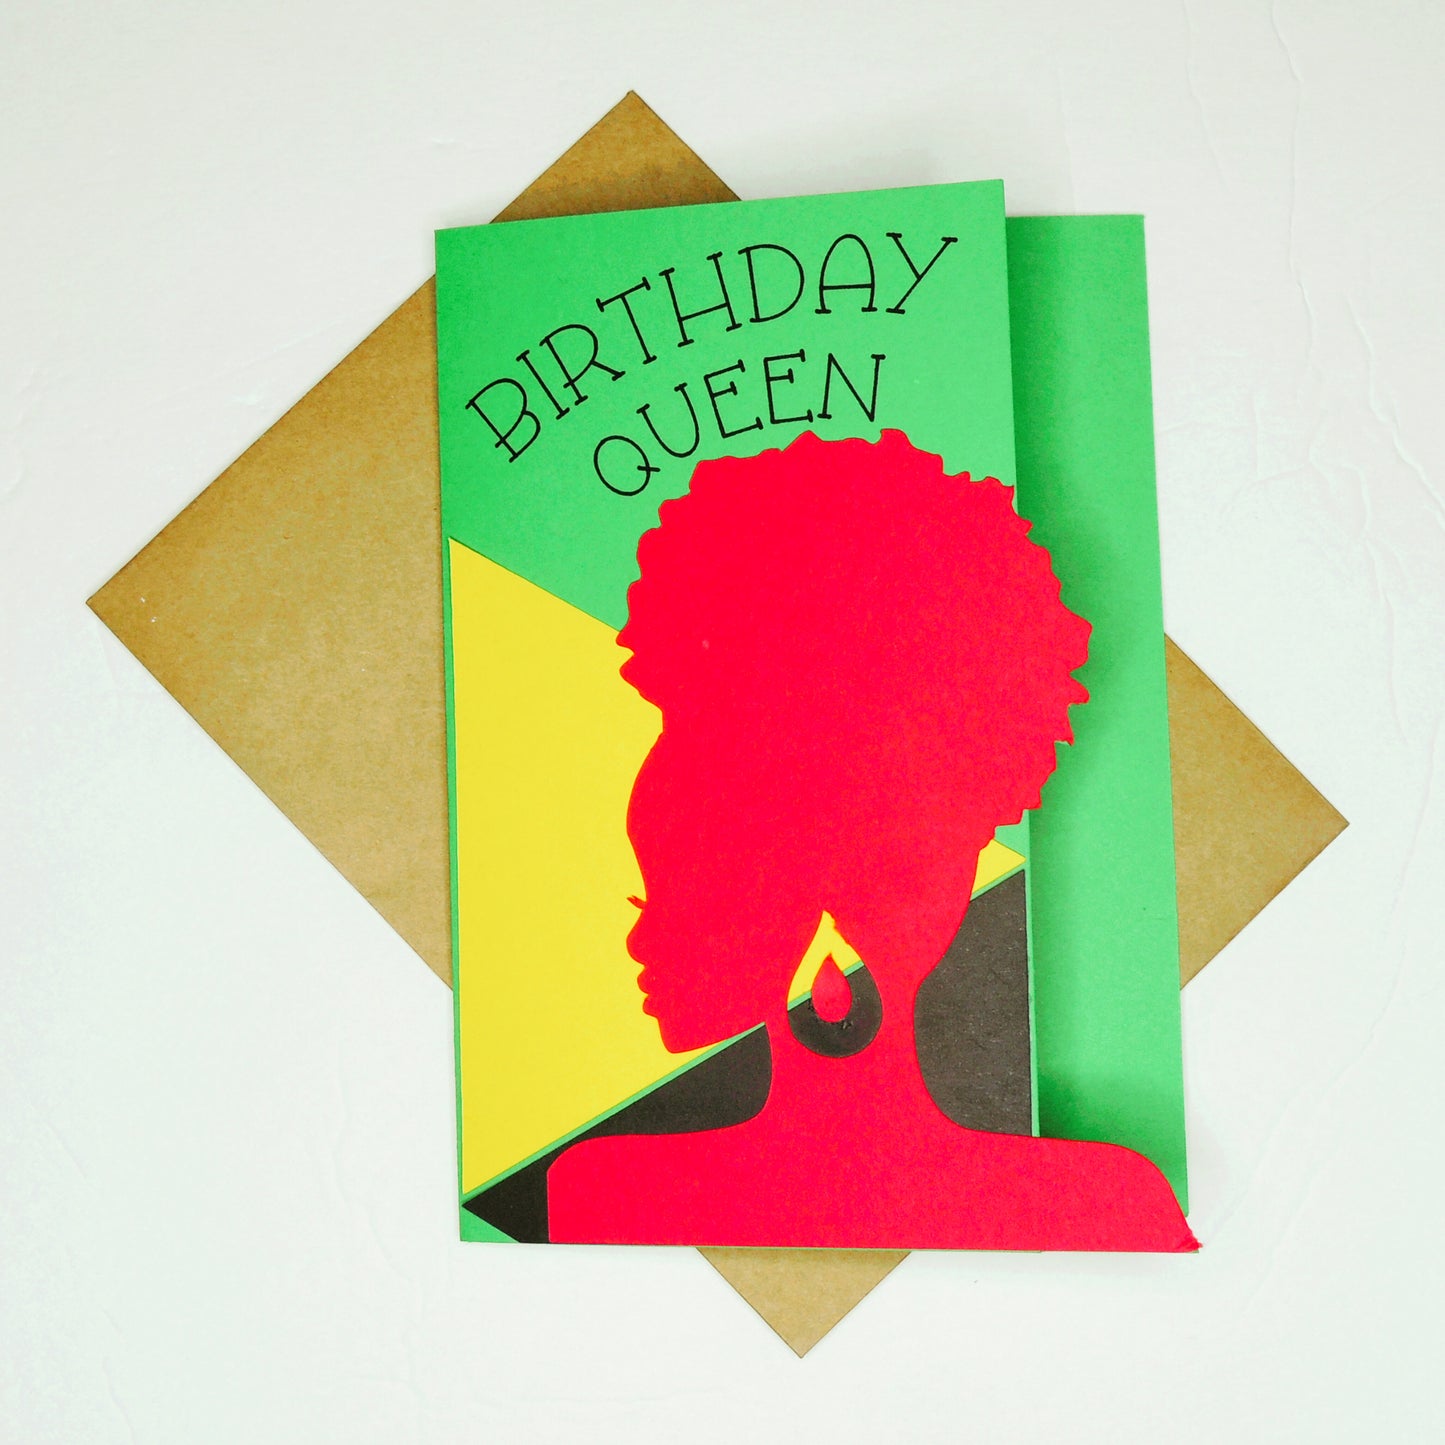 Pan African Birthday Queen Greeting Card